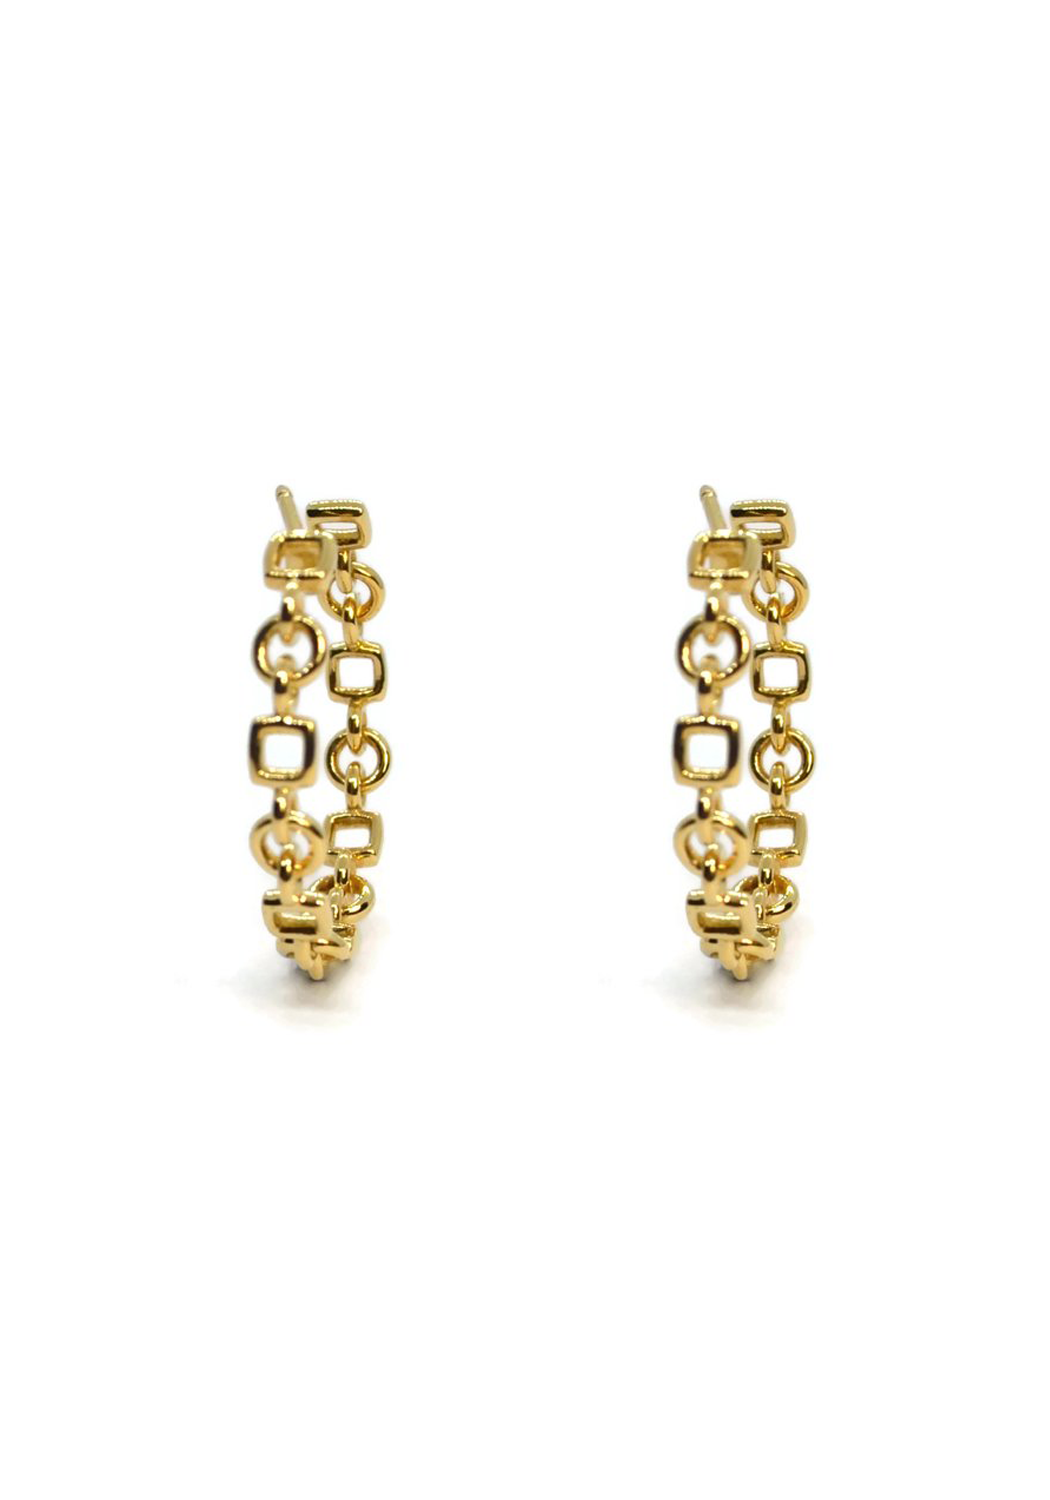 A & Furst Gaia 18KYG Round & Square Chain Link Hoop Earrings | OsterJewelers.com